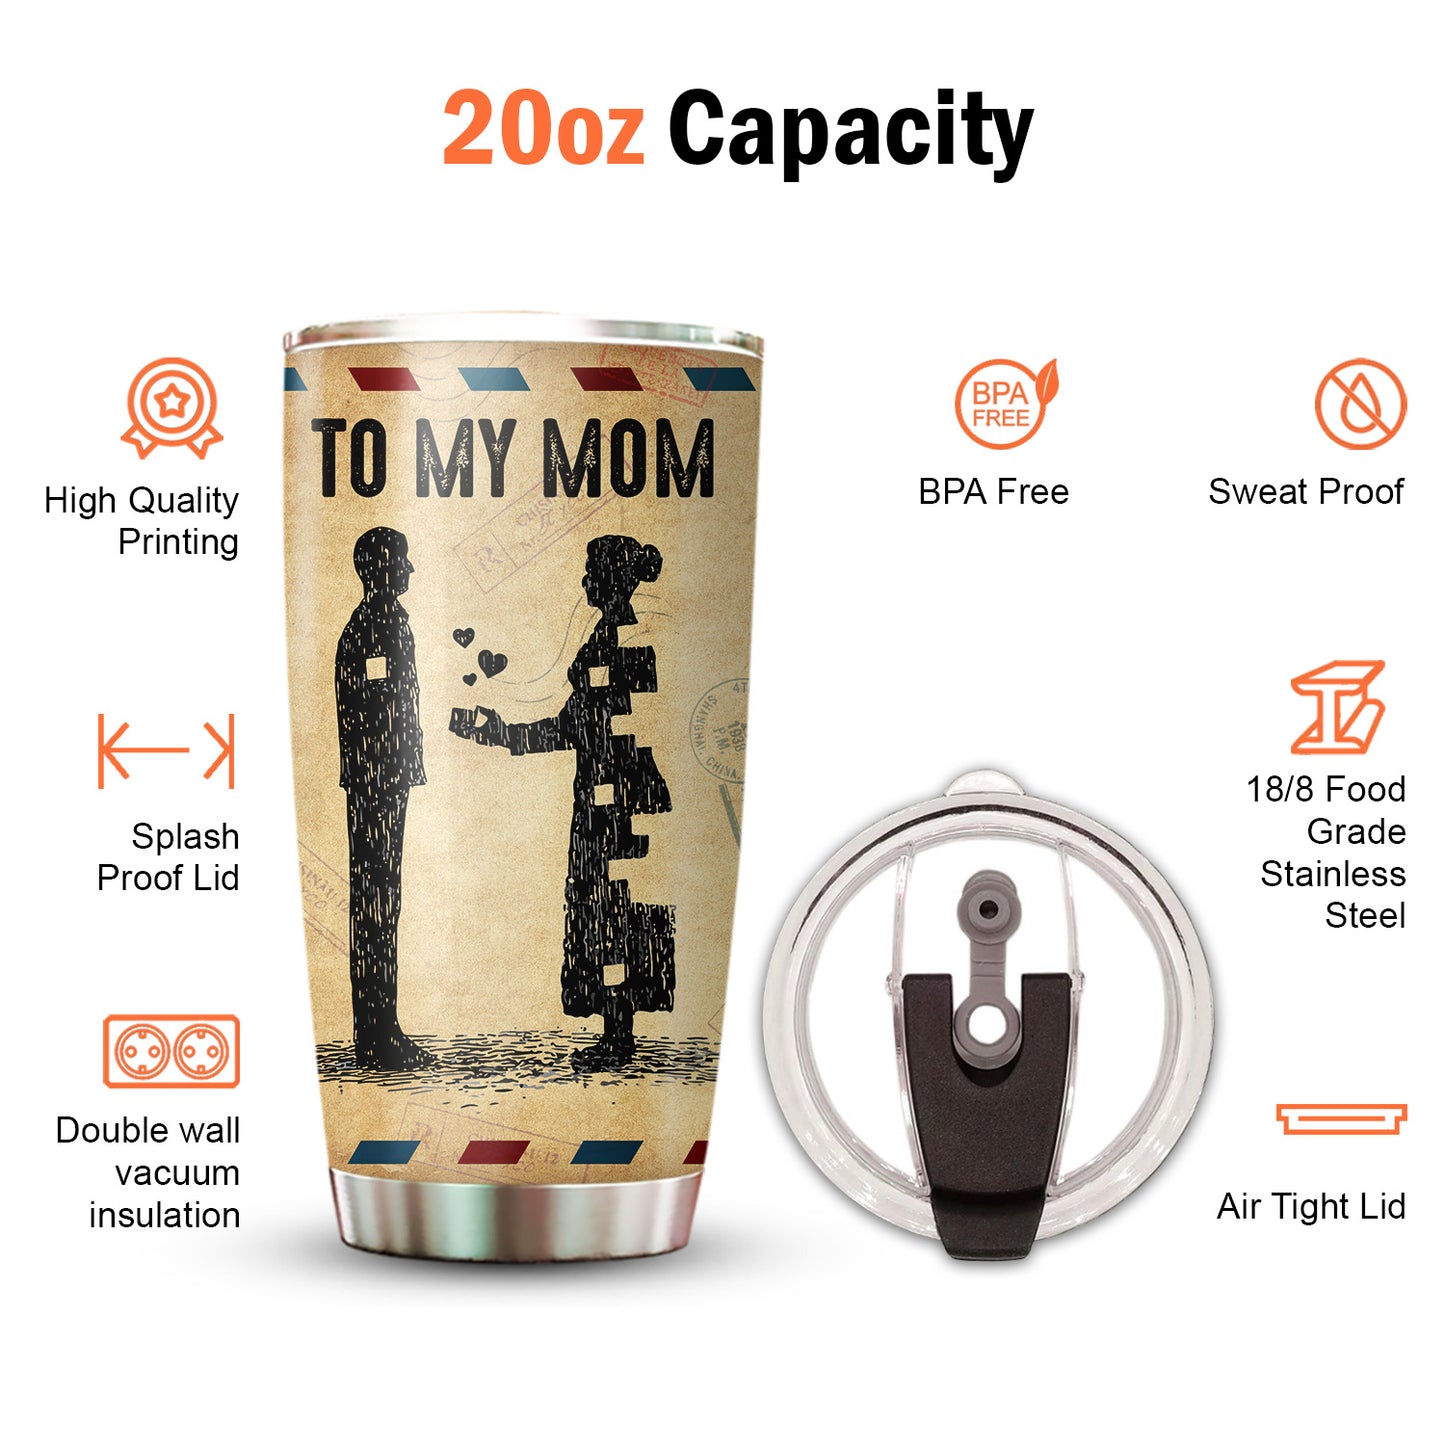 To My Mom Be My Loving Mother 20Oz Tumbler